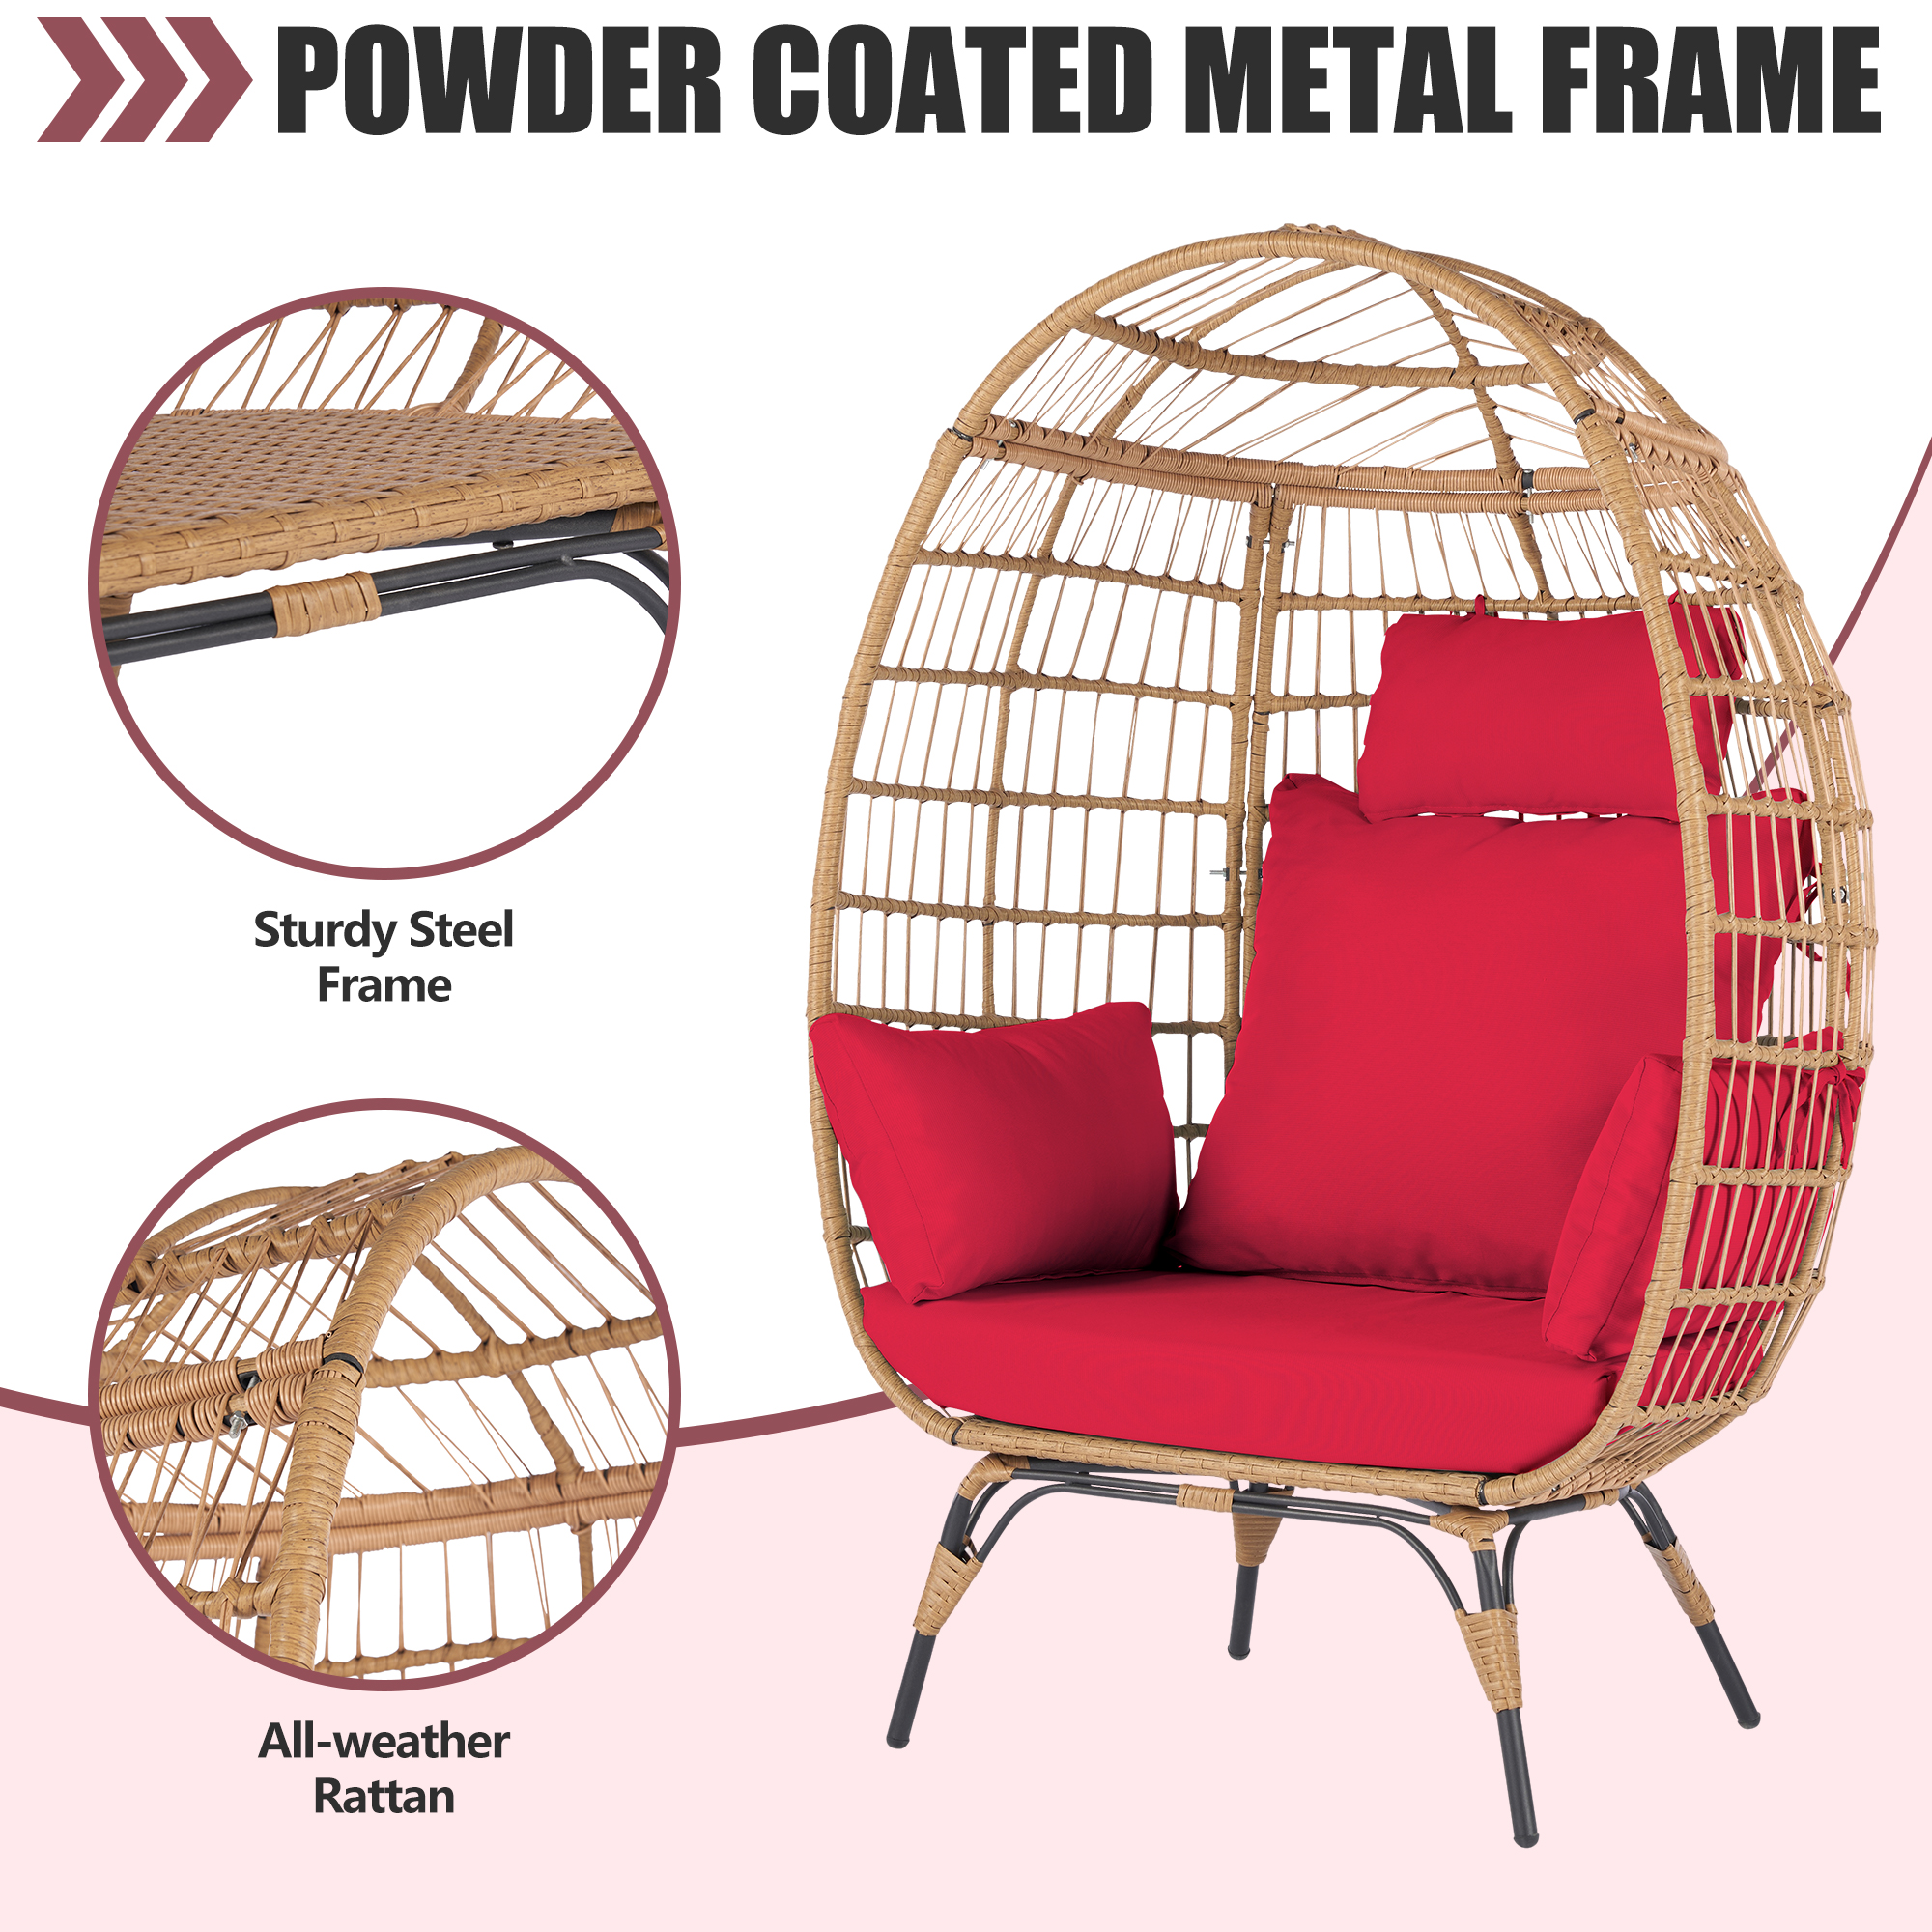 Wicker Egg Chair, Oversized Indoor Outdoor Boho Lounger Chair Stationary Egg Basket Chair, All-Weather 440lb Capacity Patio Chair, Red - image 5 of 9